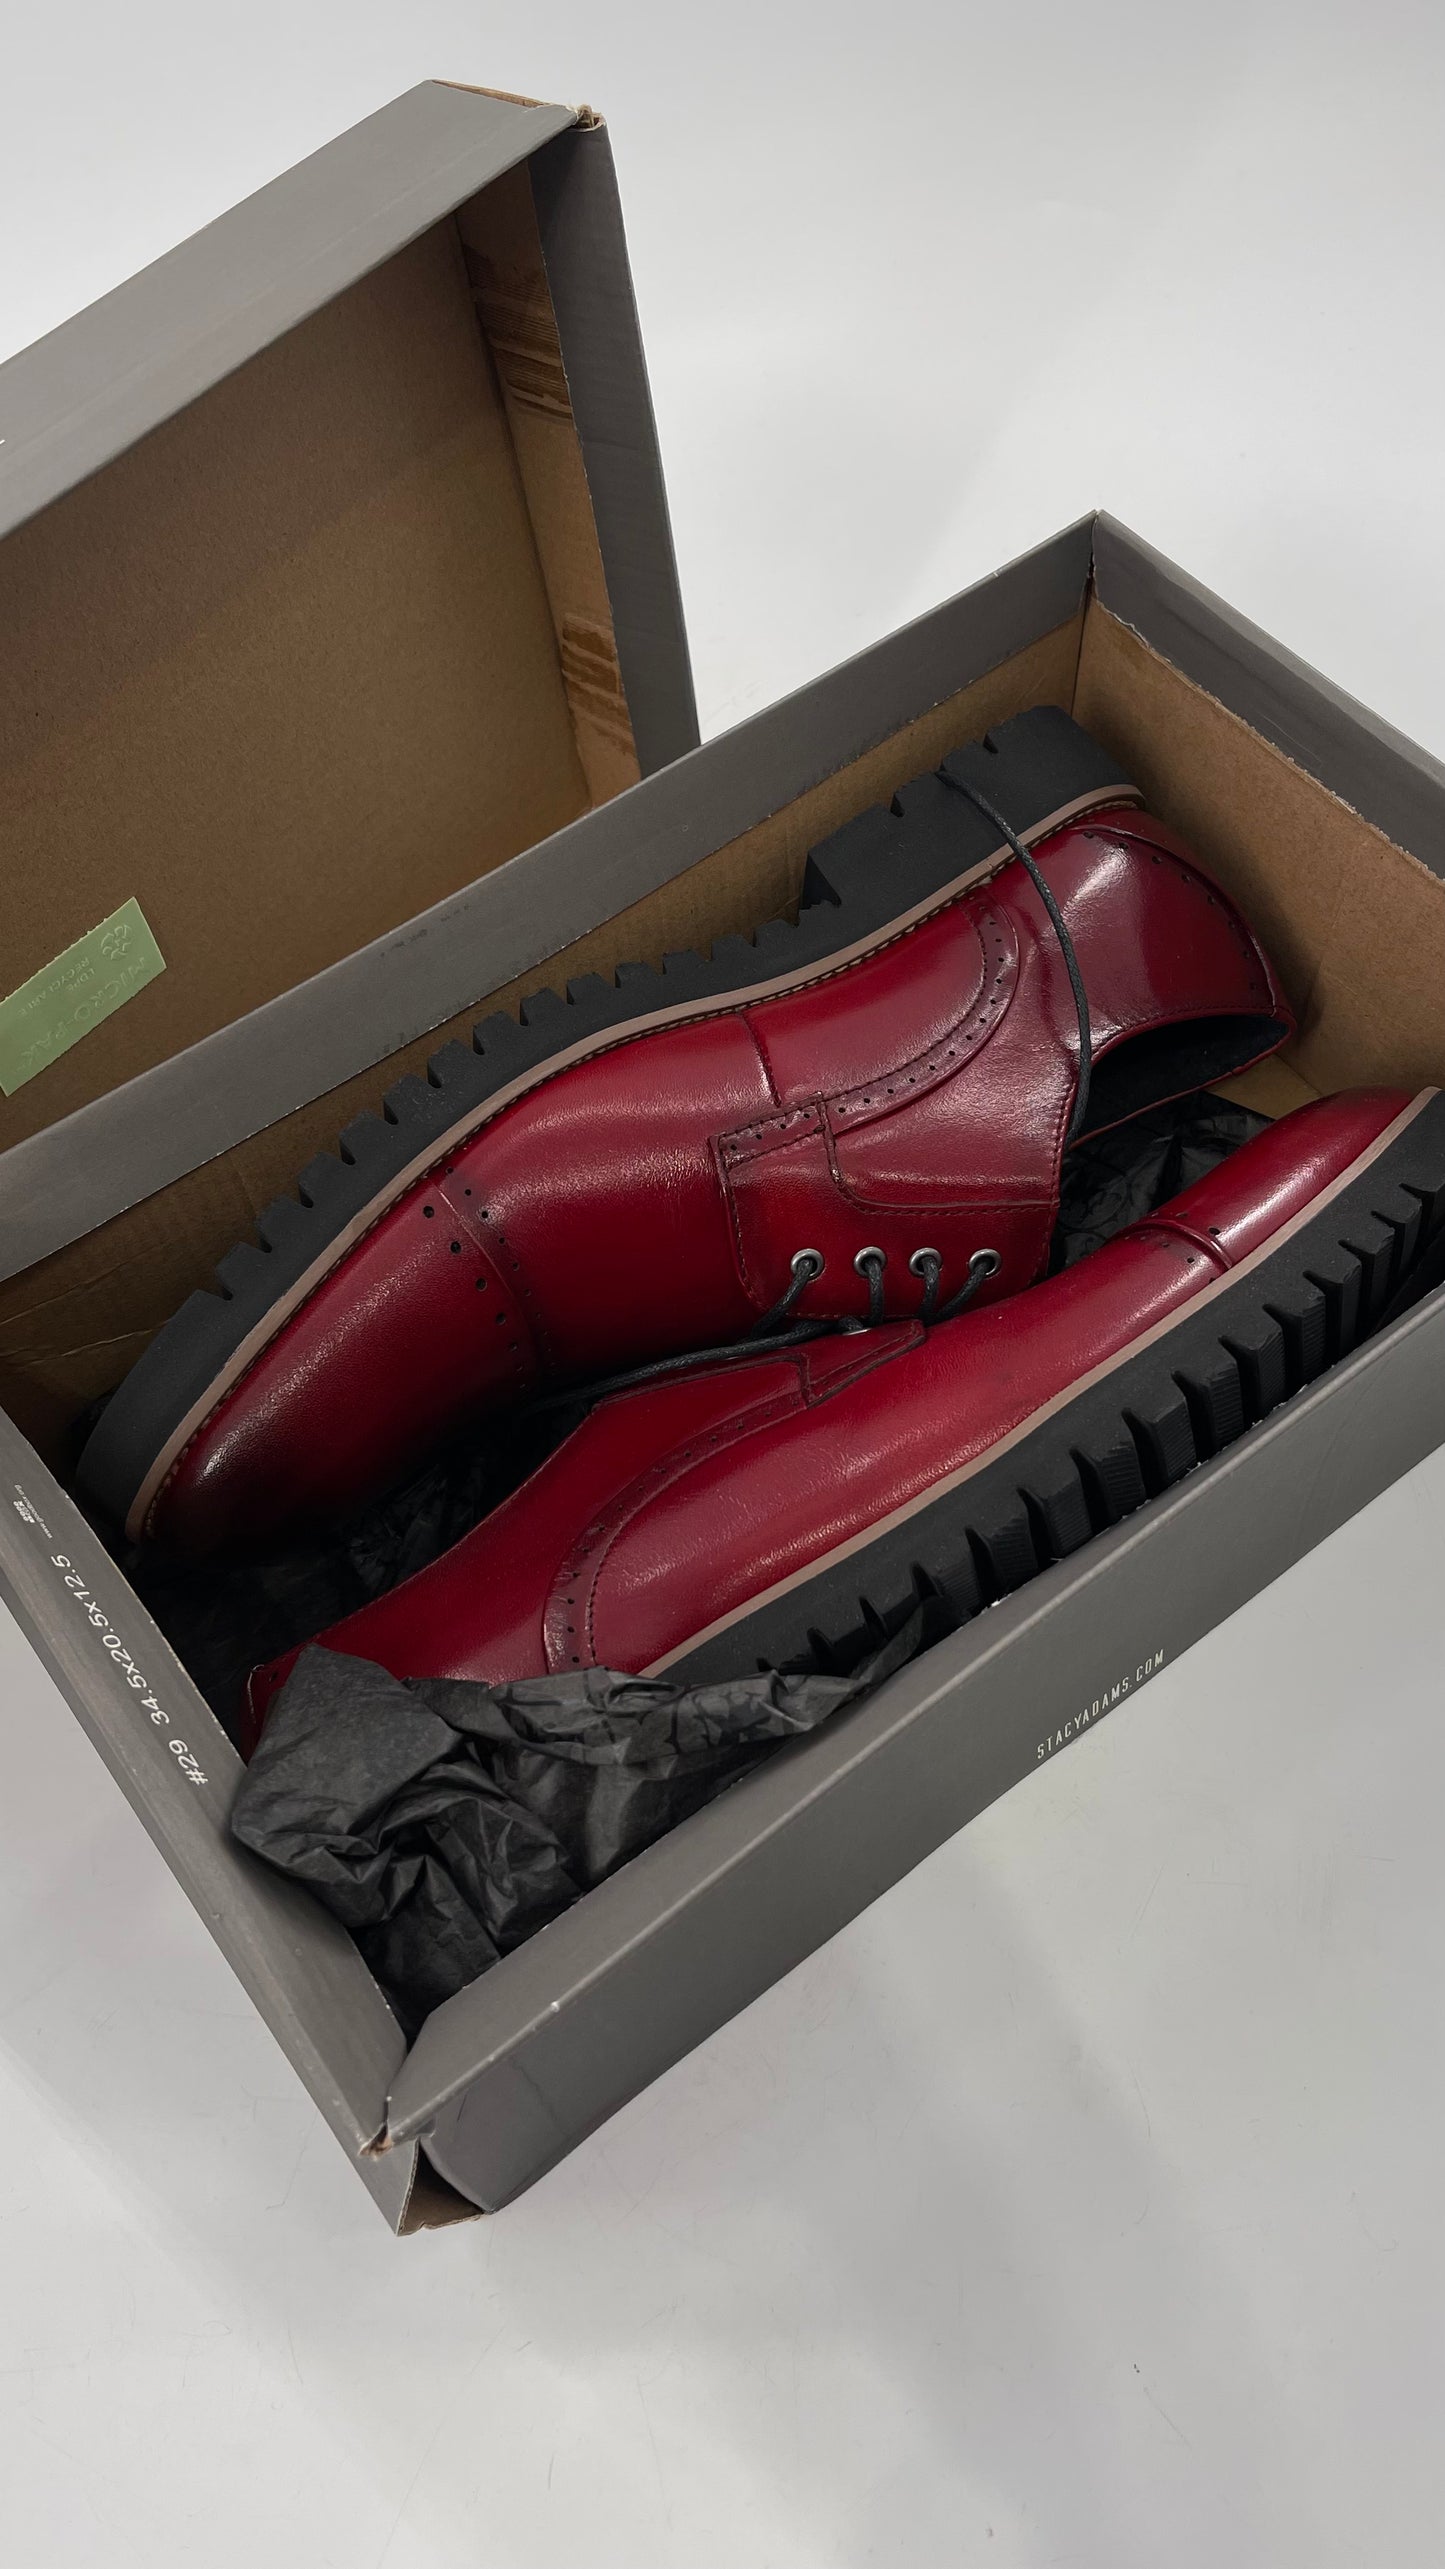 Stacy Adam’s Cherry Red Leather Oxfords with Cap Toe Detail (10)